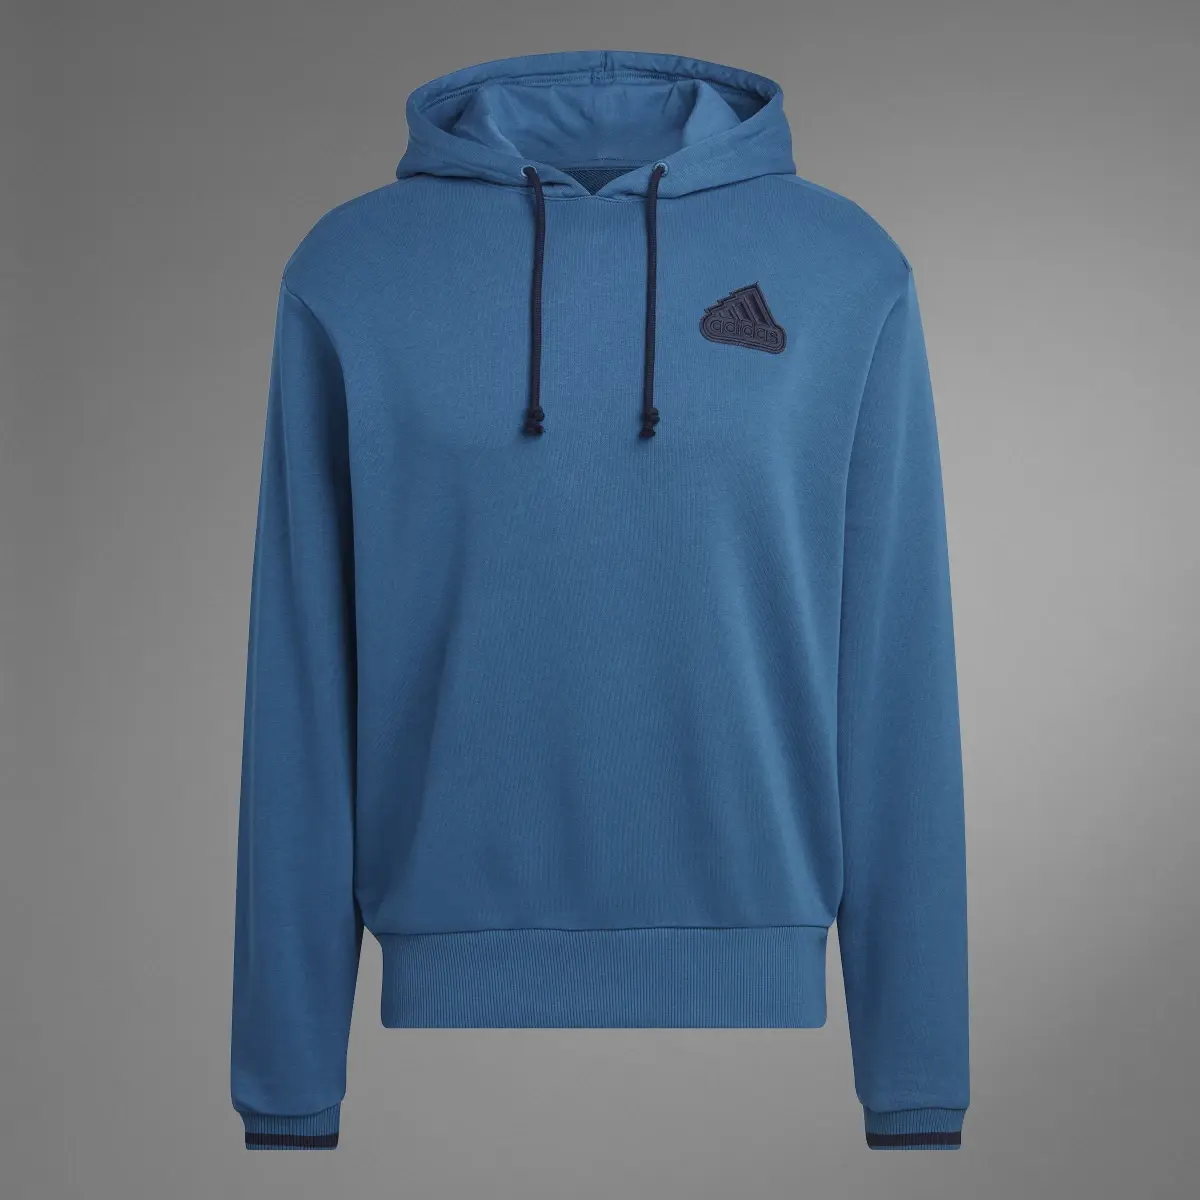 Adidas French Terry Hoodie (Gender Neutral). 3